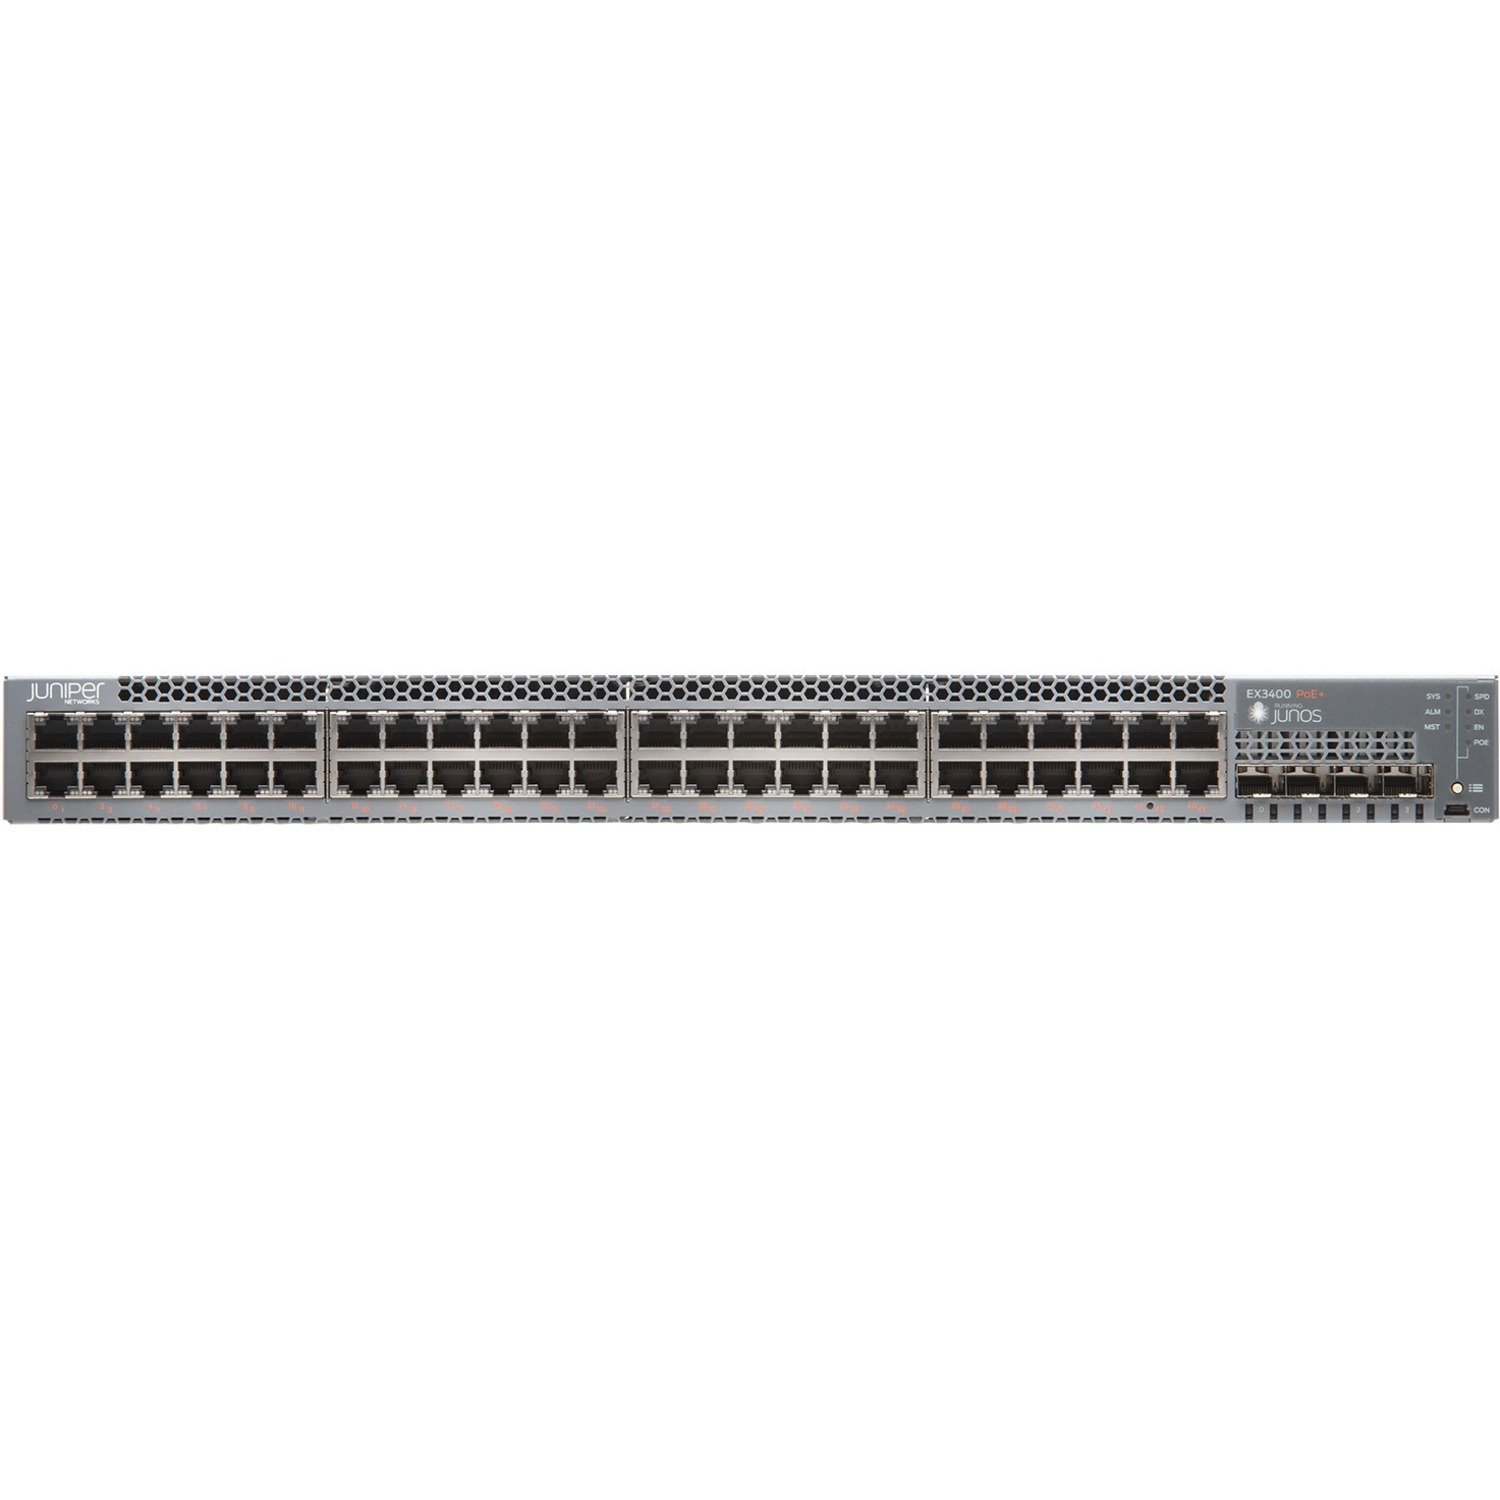 Juniper EX3400 EX3400-48T 48 Ports Manageable Layer 3 Switch - Gigabit Ethernet, 10 Gigabit Ethernet, 40 Gigabit Ethernet - 40GBase-X, 10GBase-X, 1000Base-T